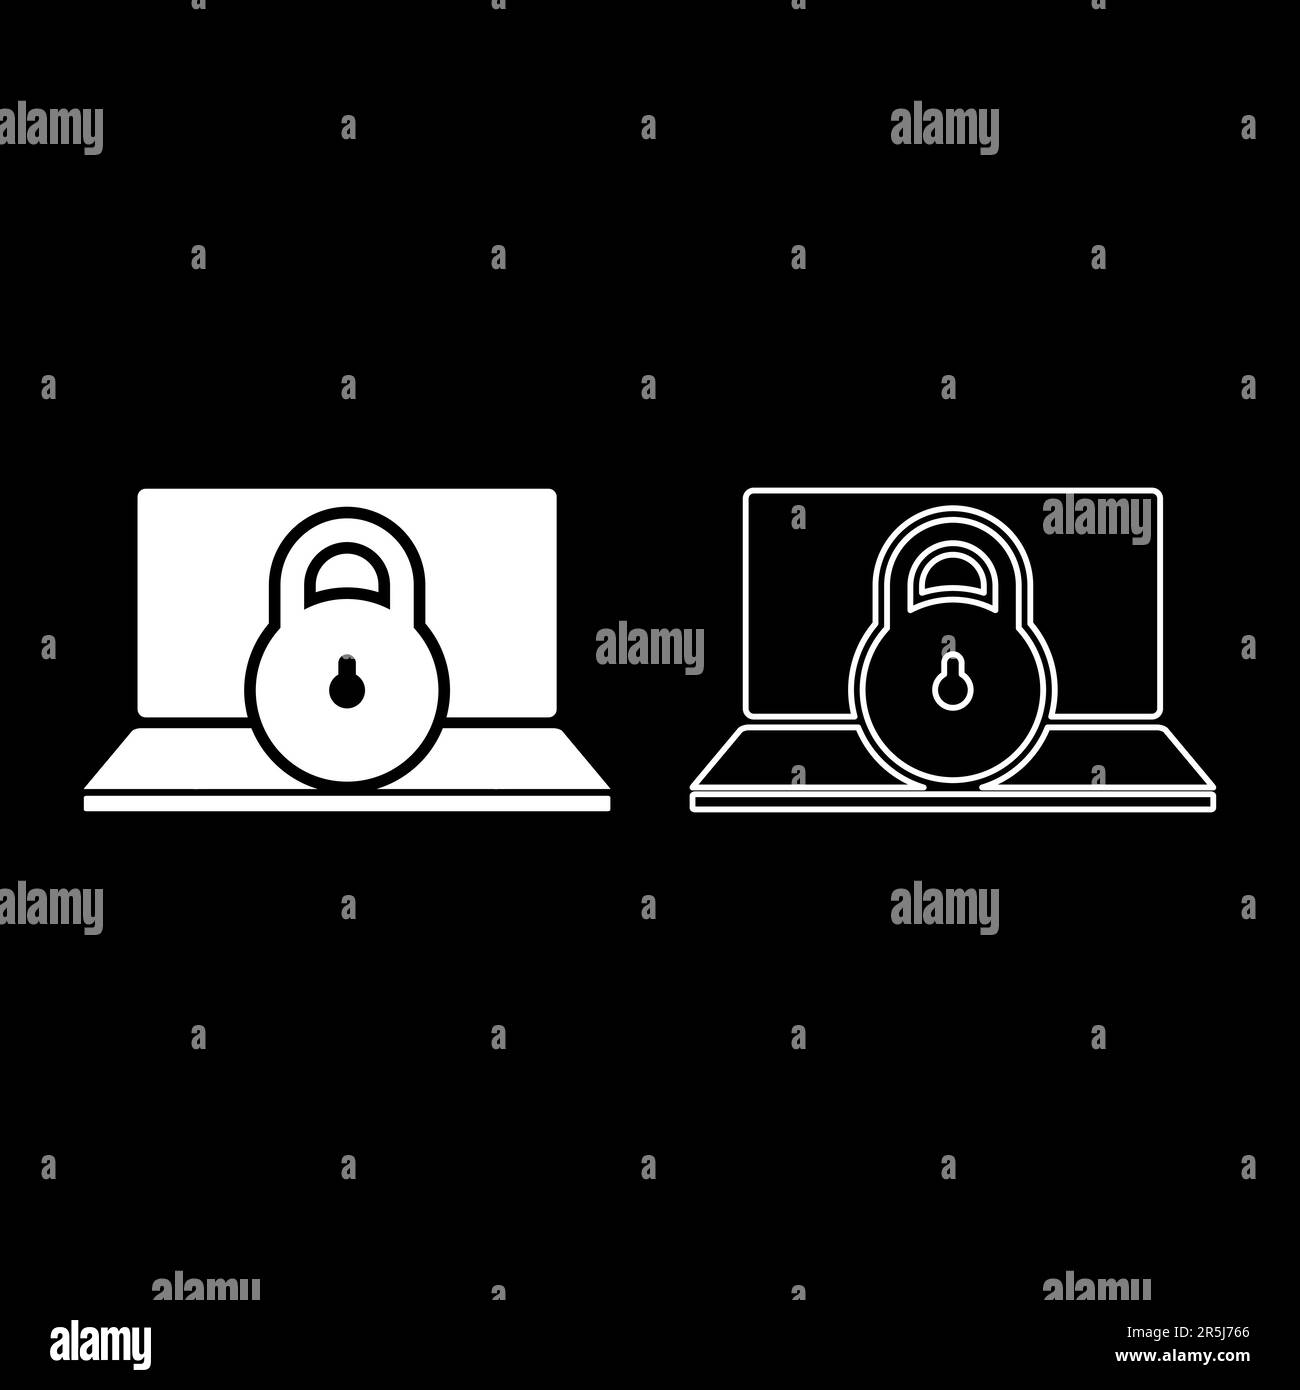 Laptop lock personal data security cyber access concept locked padlock use set icon white color vector illustration image simple solid fill outline Stock Vector